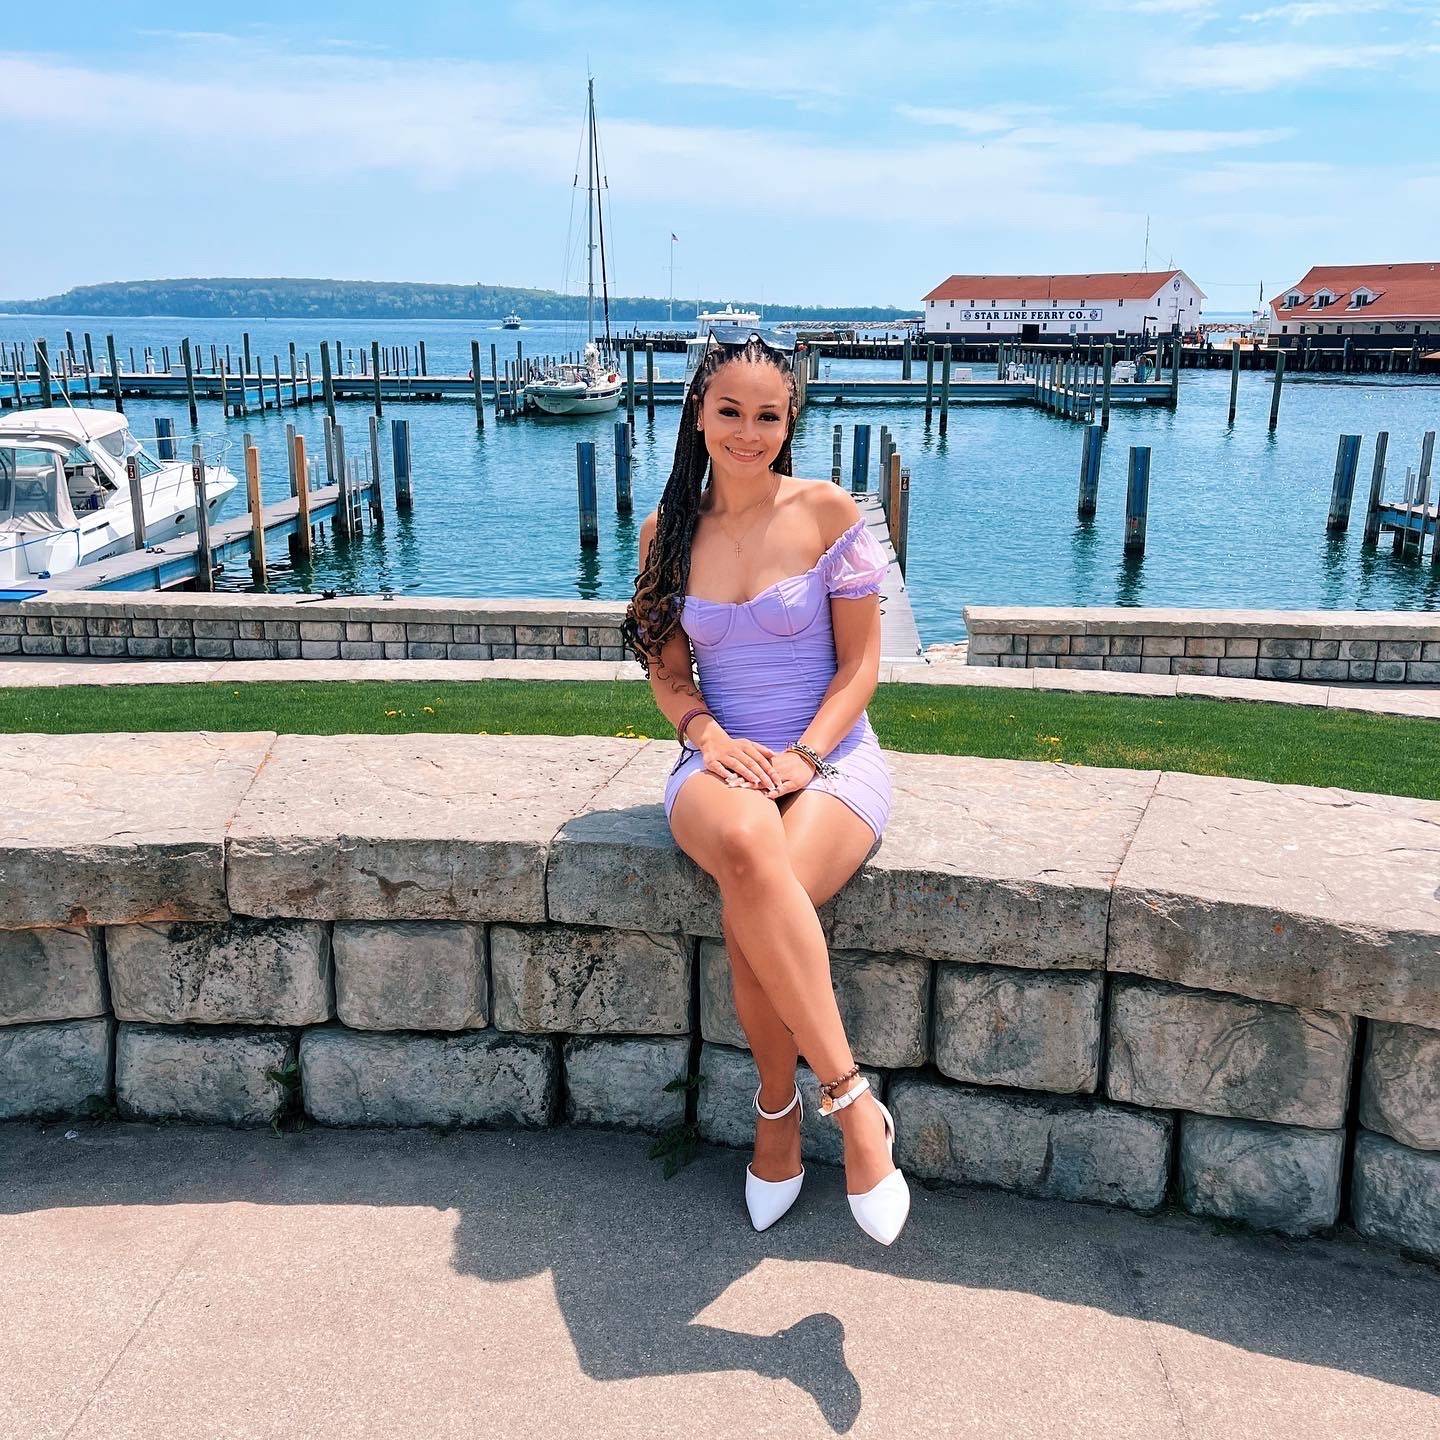 Girl with black hair and purple dress sitting on a stone wall with a lake and harbor in the background